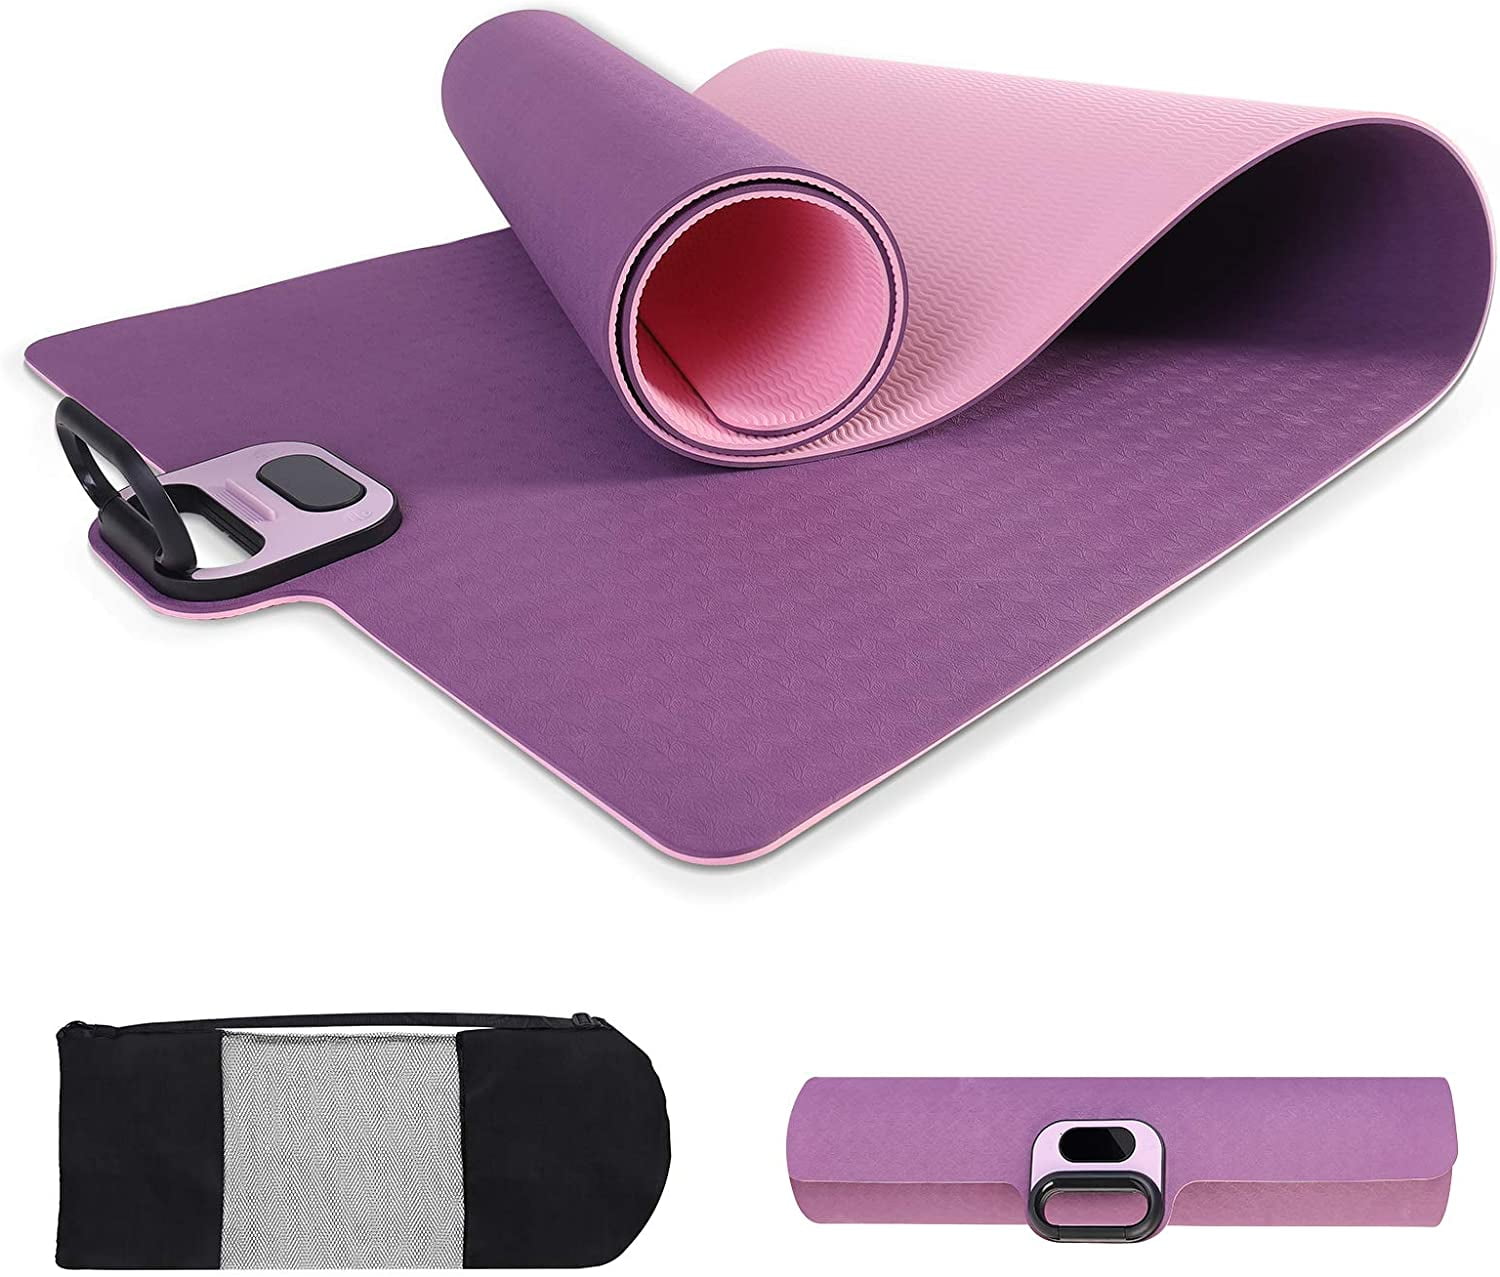 TPE Yoga Mat Gym Gymnastics Exercise Pilates Fitness Workout Mats Non Slip Thick Ideal for Home and Kids 72x24x0.24in 